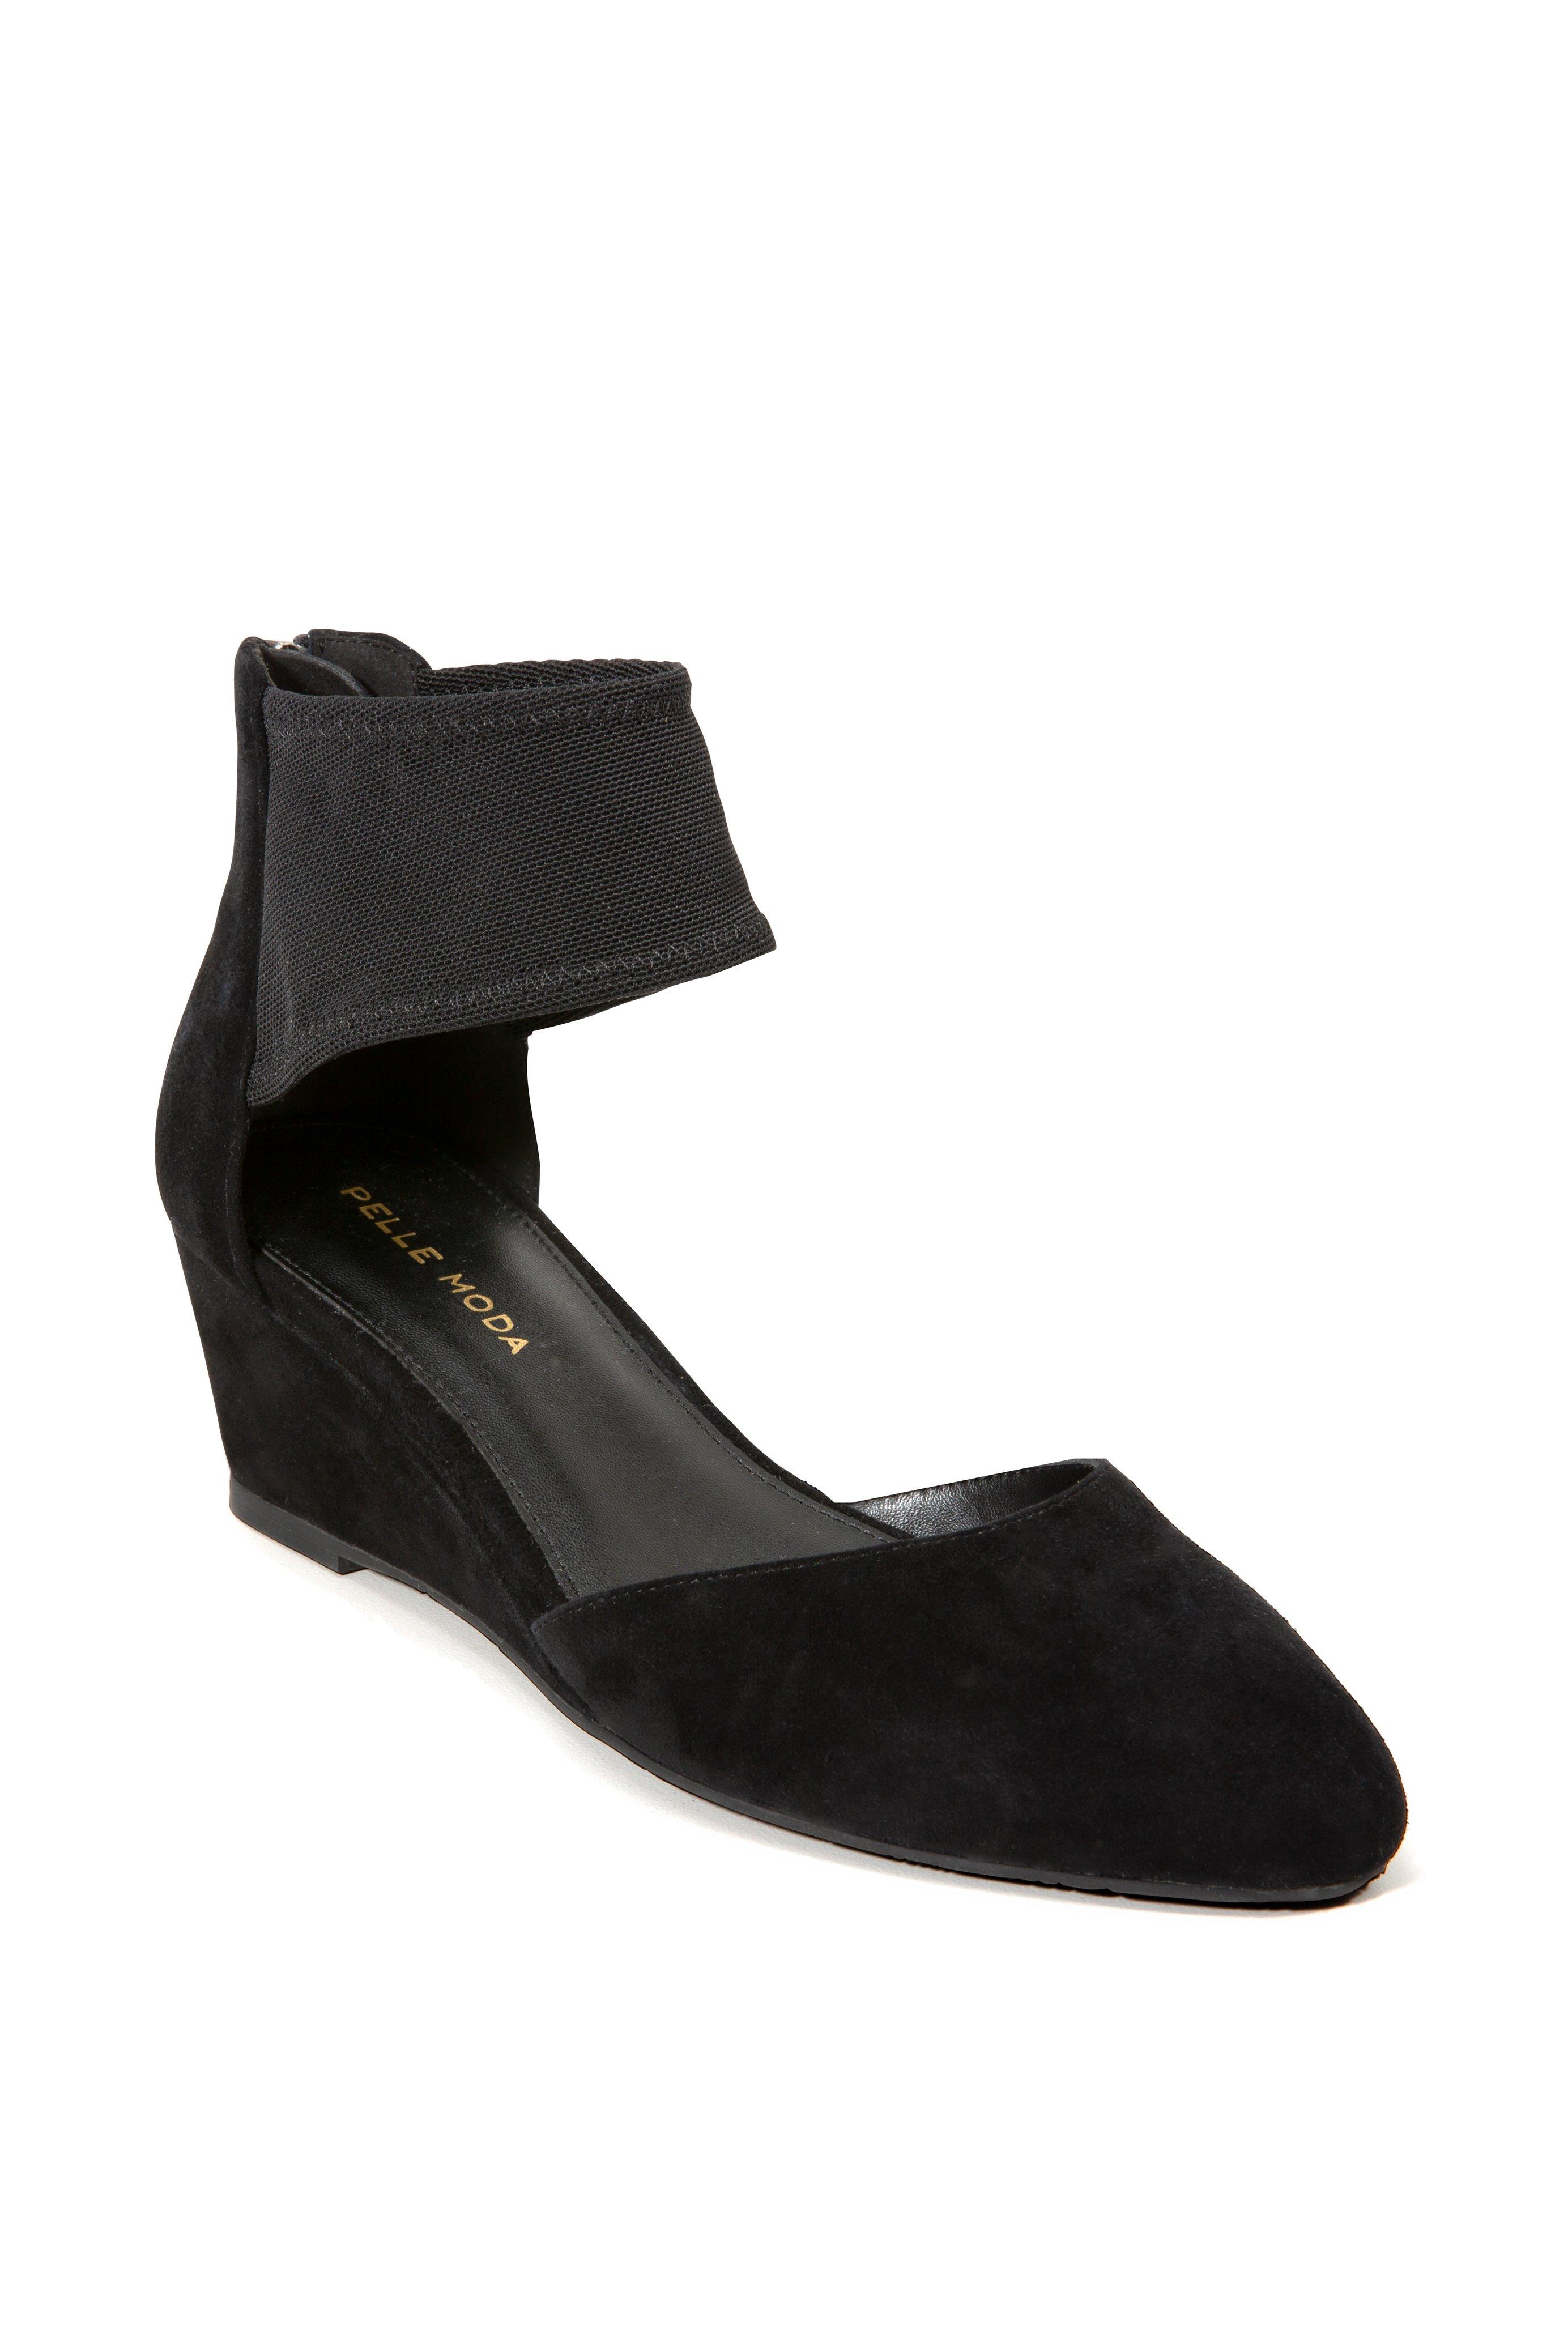 black wedge closed toe shoes